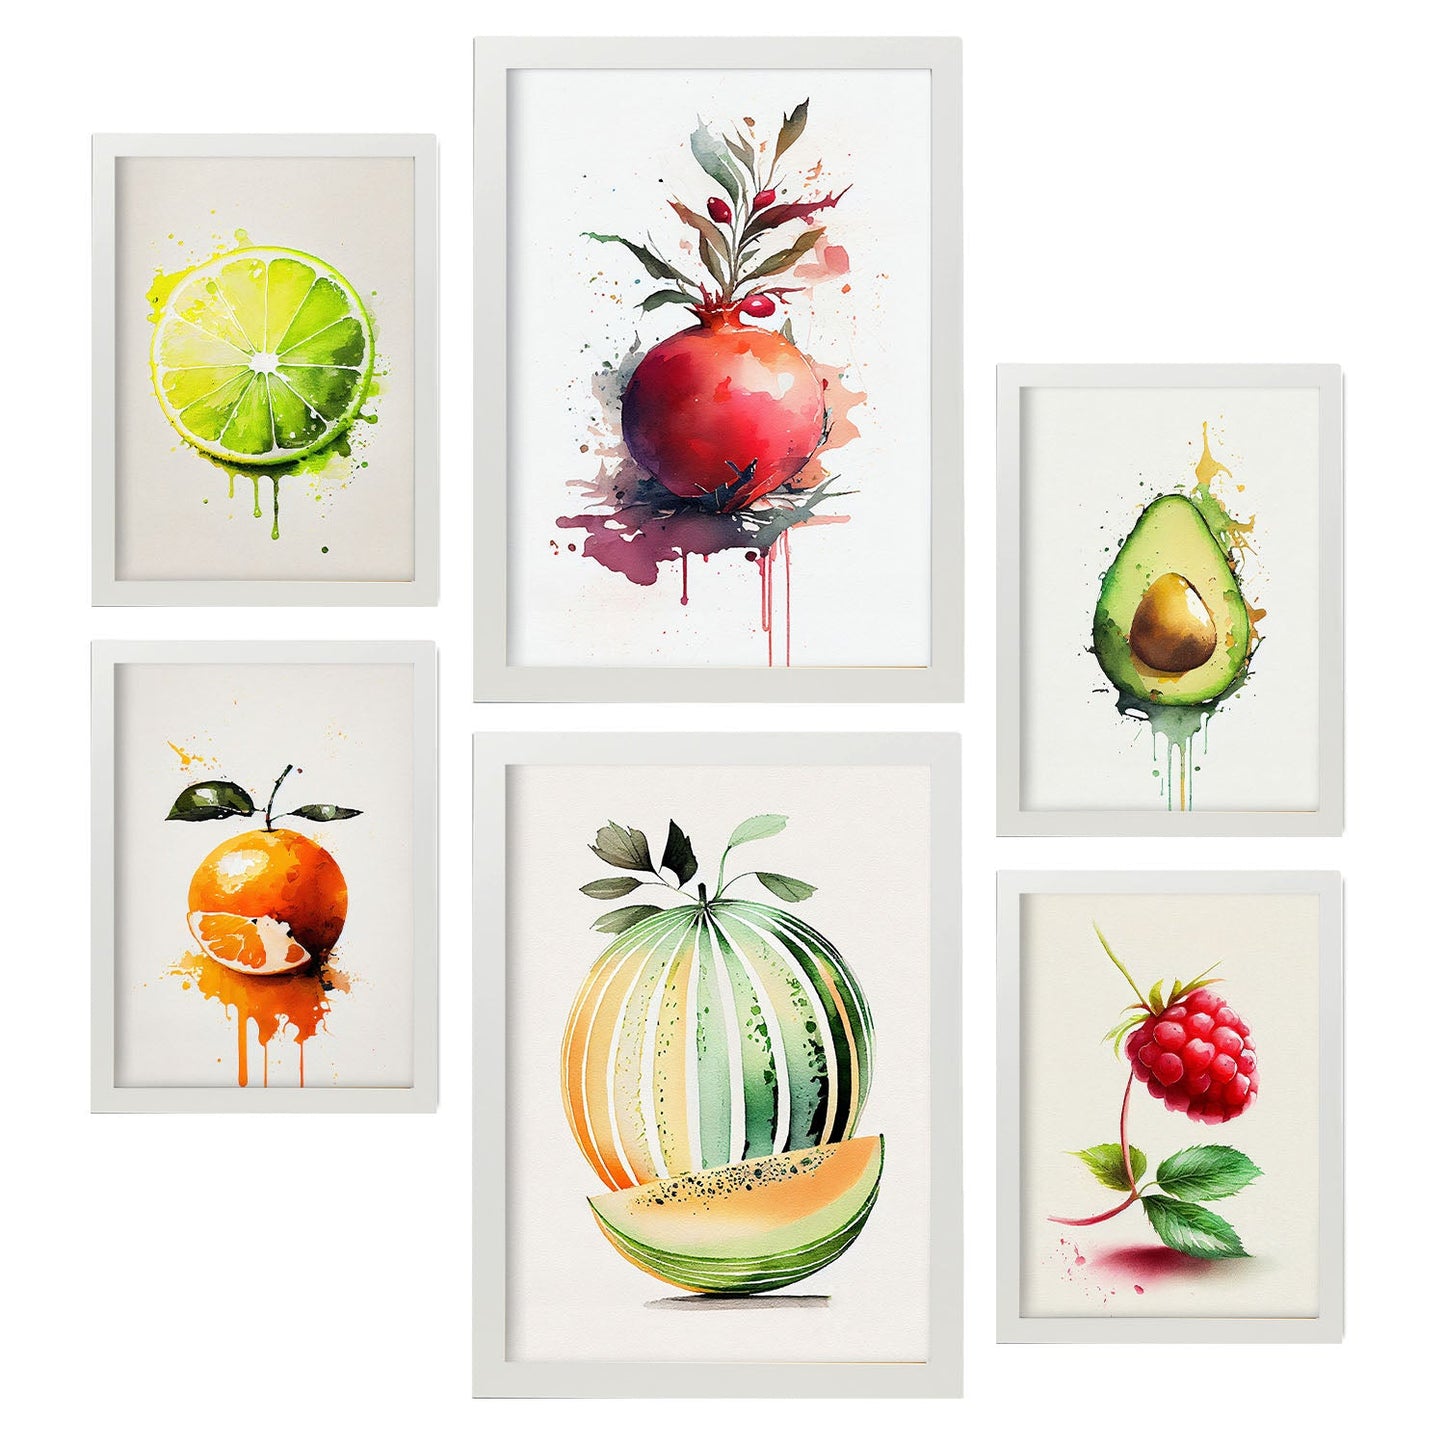 Nacnic Watercolor Fruits Set_03. Aesthetic Wall Art Prints for Bedroom or Living Room Design.